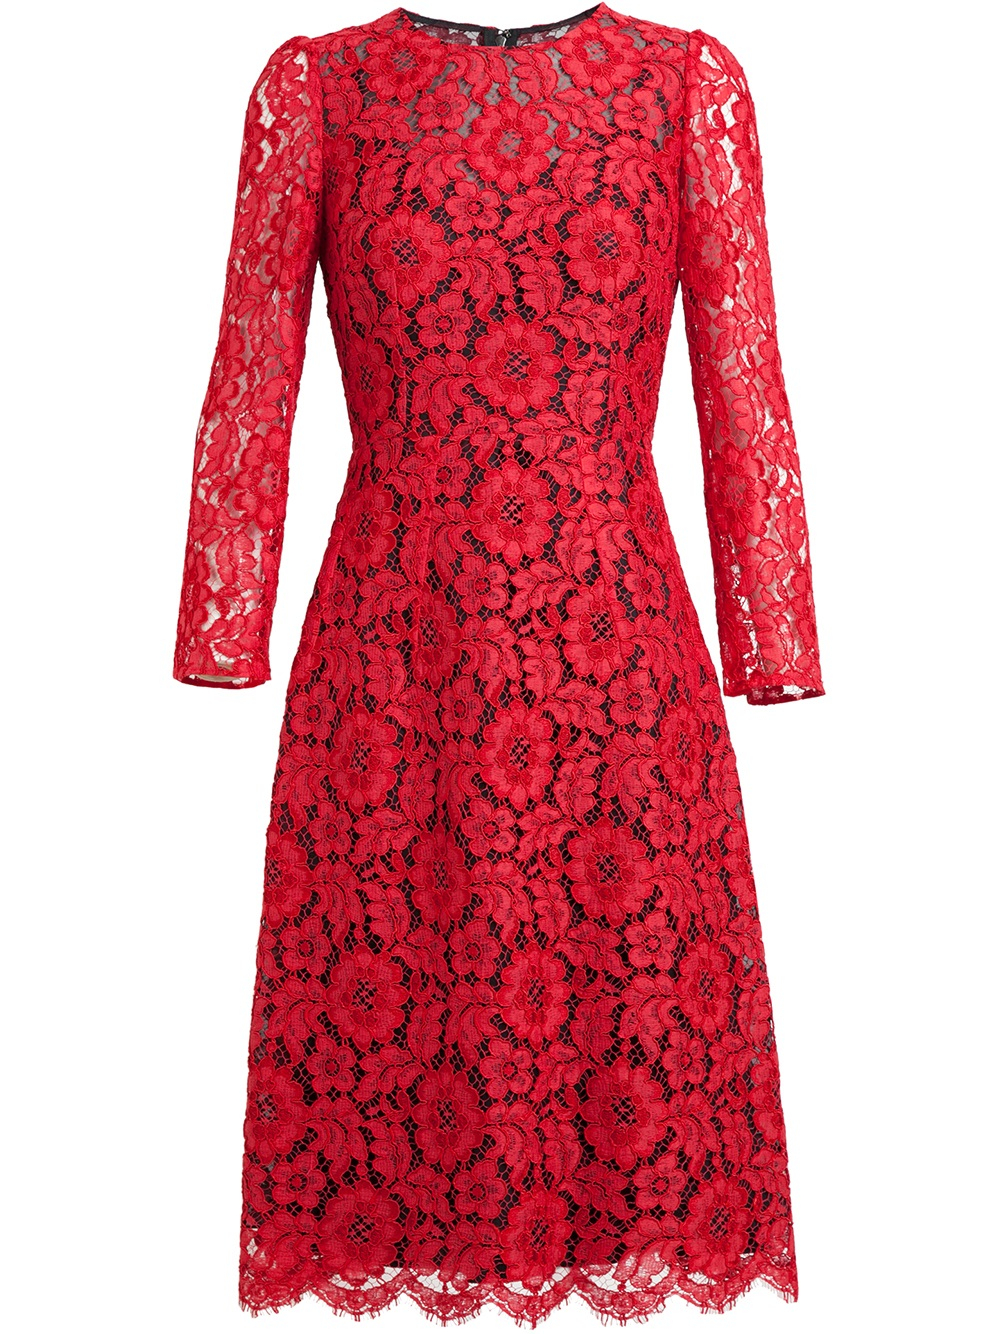 Lyst - Dolce & Gabbana Floral Lace Dress in Red